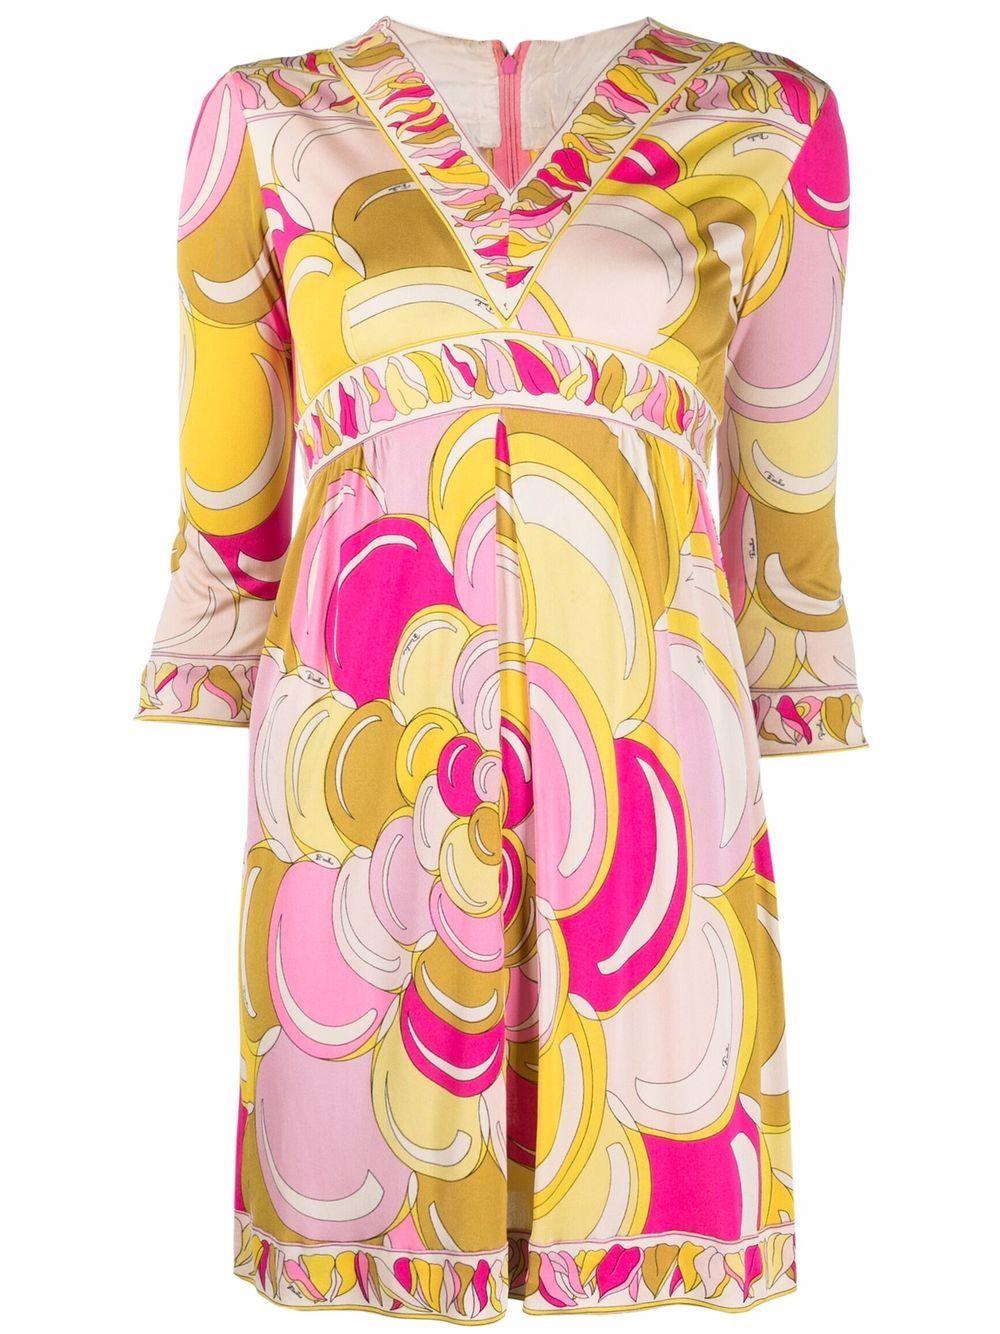 1970s Emilio Pucci multicolour silk short shirt dress featuring a flower print, a  back zip and a short-length. 
Circa 1970s 
In good vintage condition. Made in Italy. 
Estimated size 36fr/ US4/ UK8
100% silk
We guarantee you will receive this